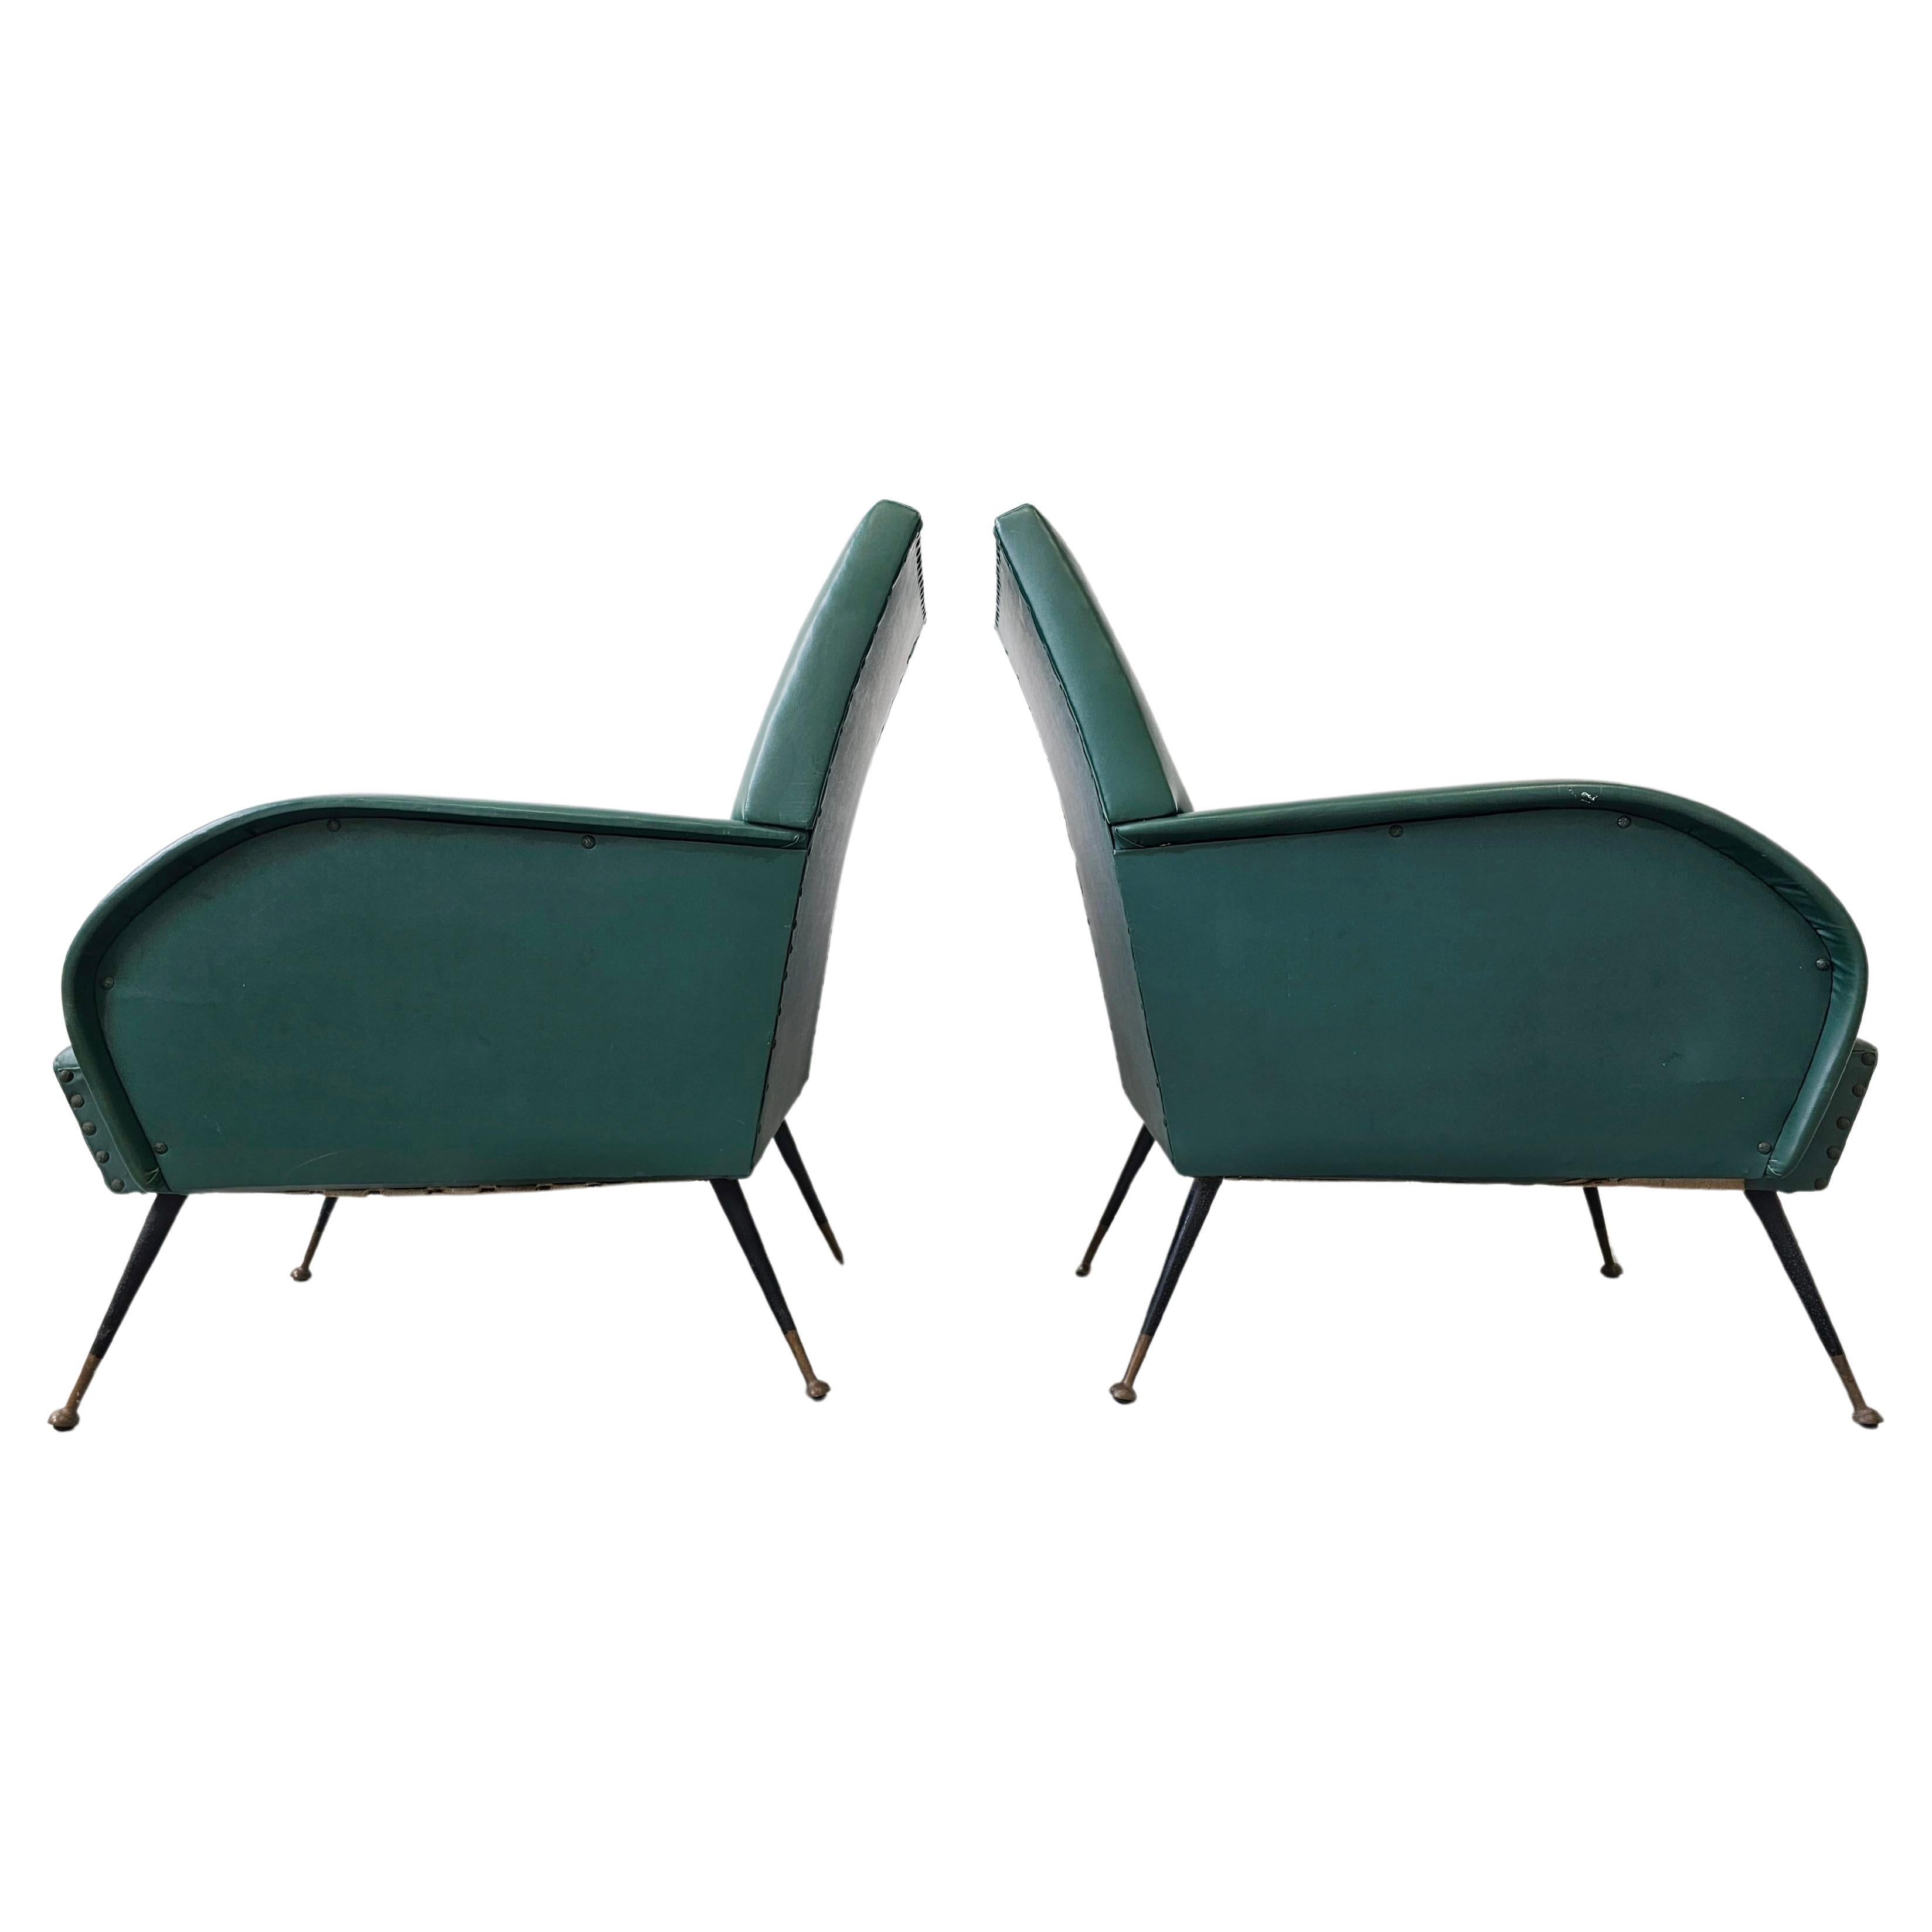 Pair of Mid Century Modern Armchairs in style of Marco Zanuso, Italy 1950s For Sale